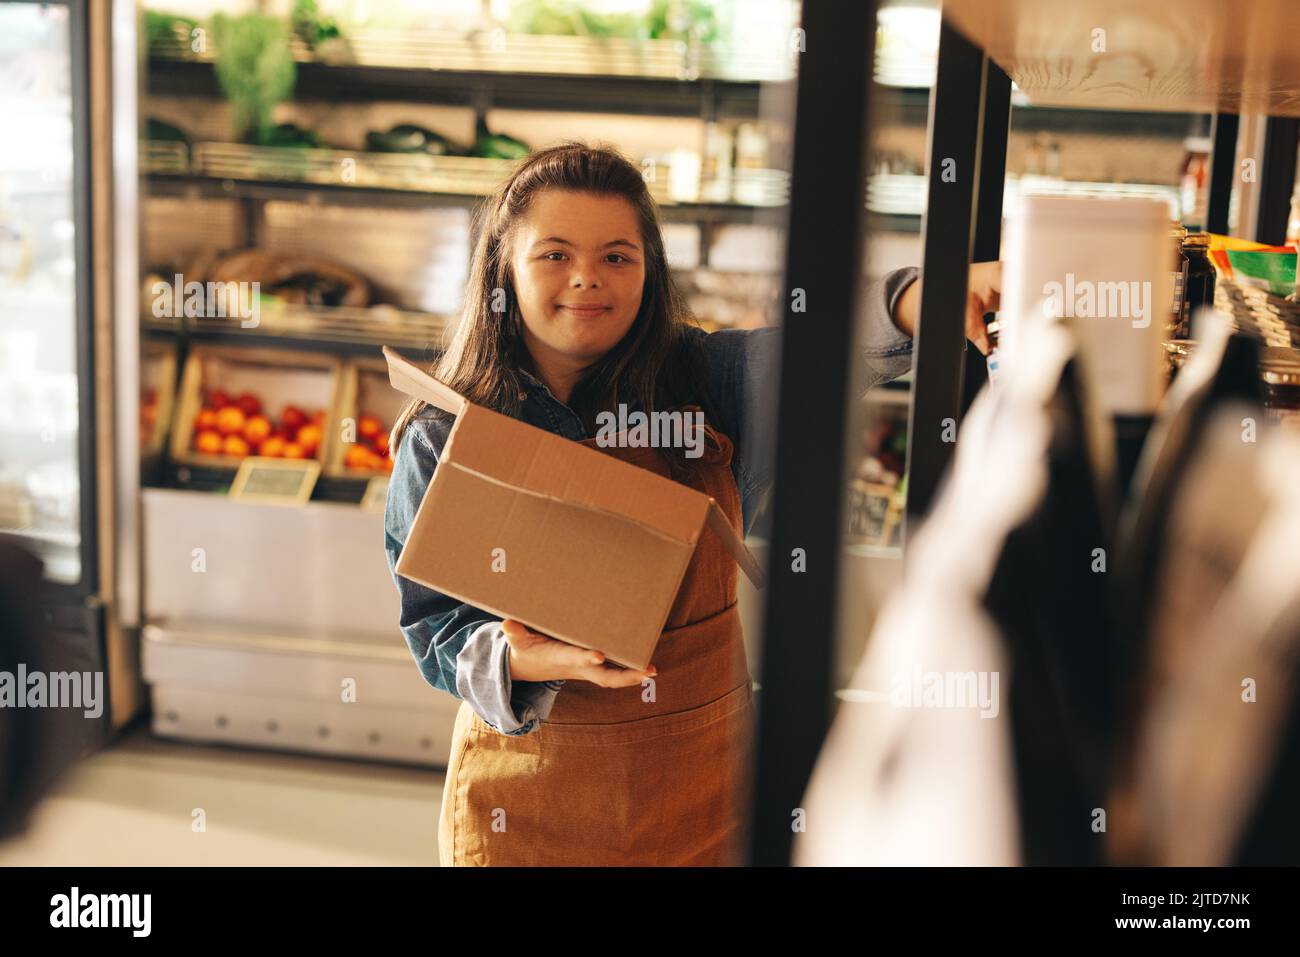 Store worker with Down syndrome restocking food products onto the shop shelves. Empowered woman with an intellectual disability working as a shopkeepe Stock Photo